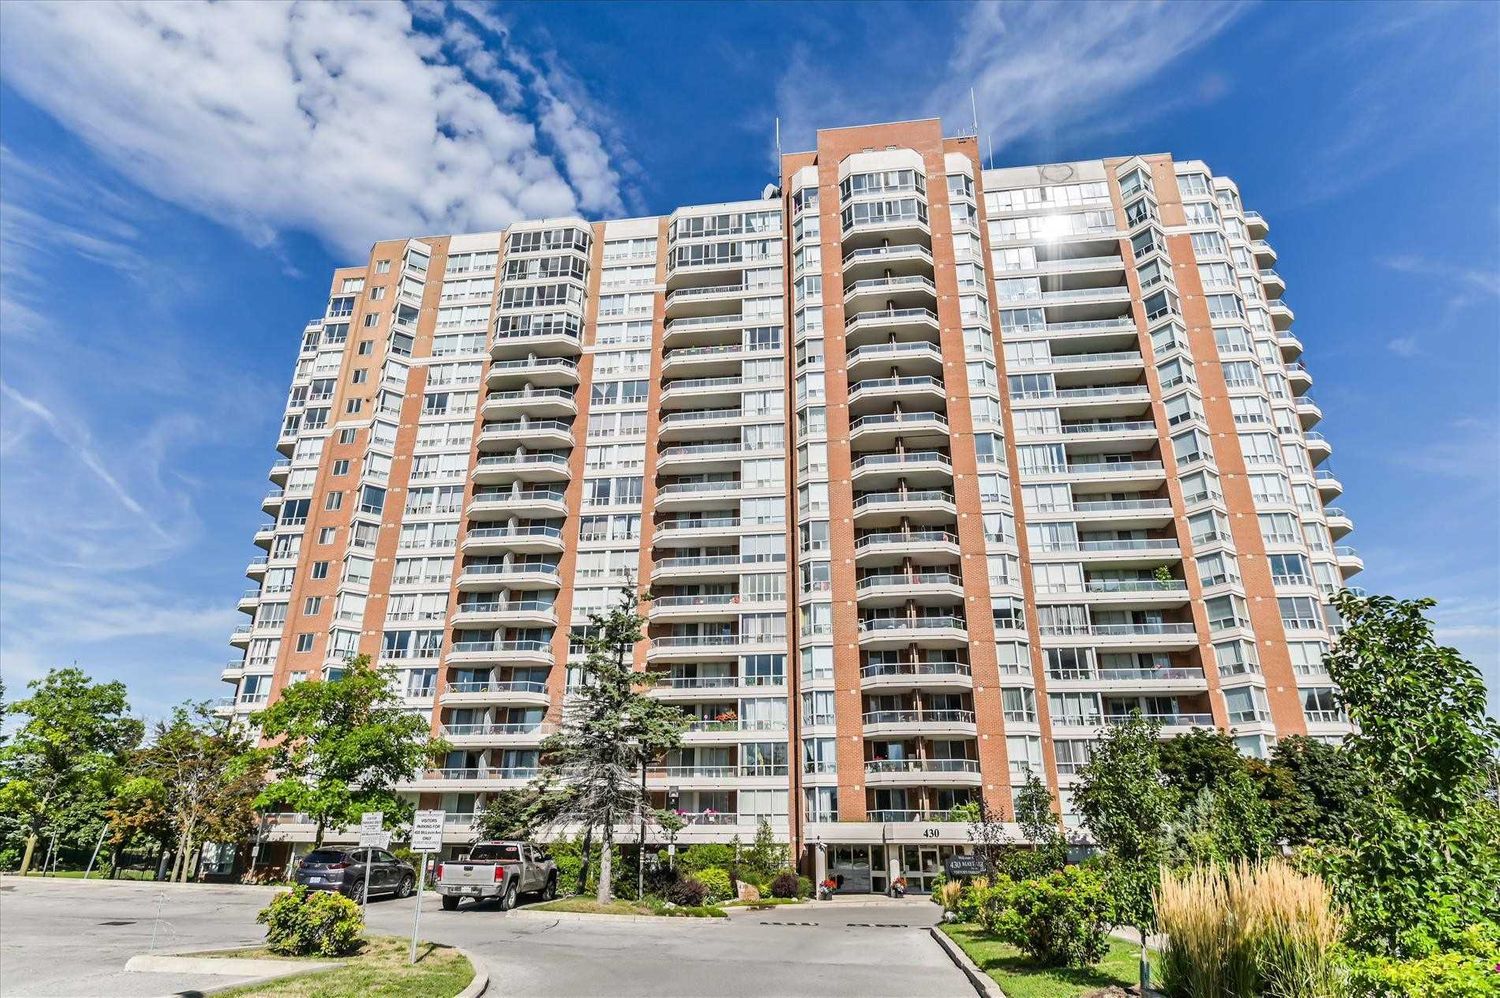 430 Mclevin Avenue. Mayfair on the Green III Condos is located in  Scarborough, Toronto - image #1 of 2